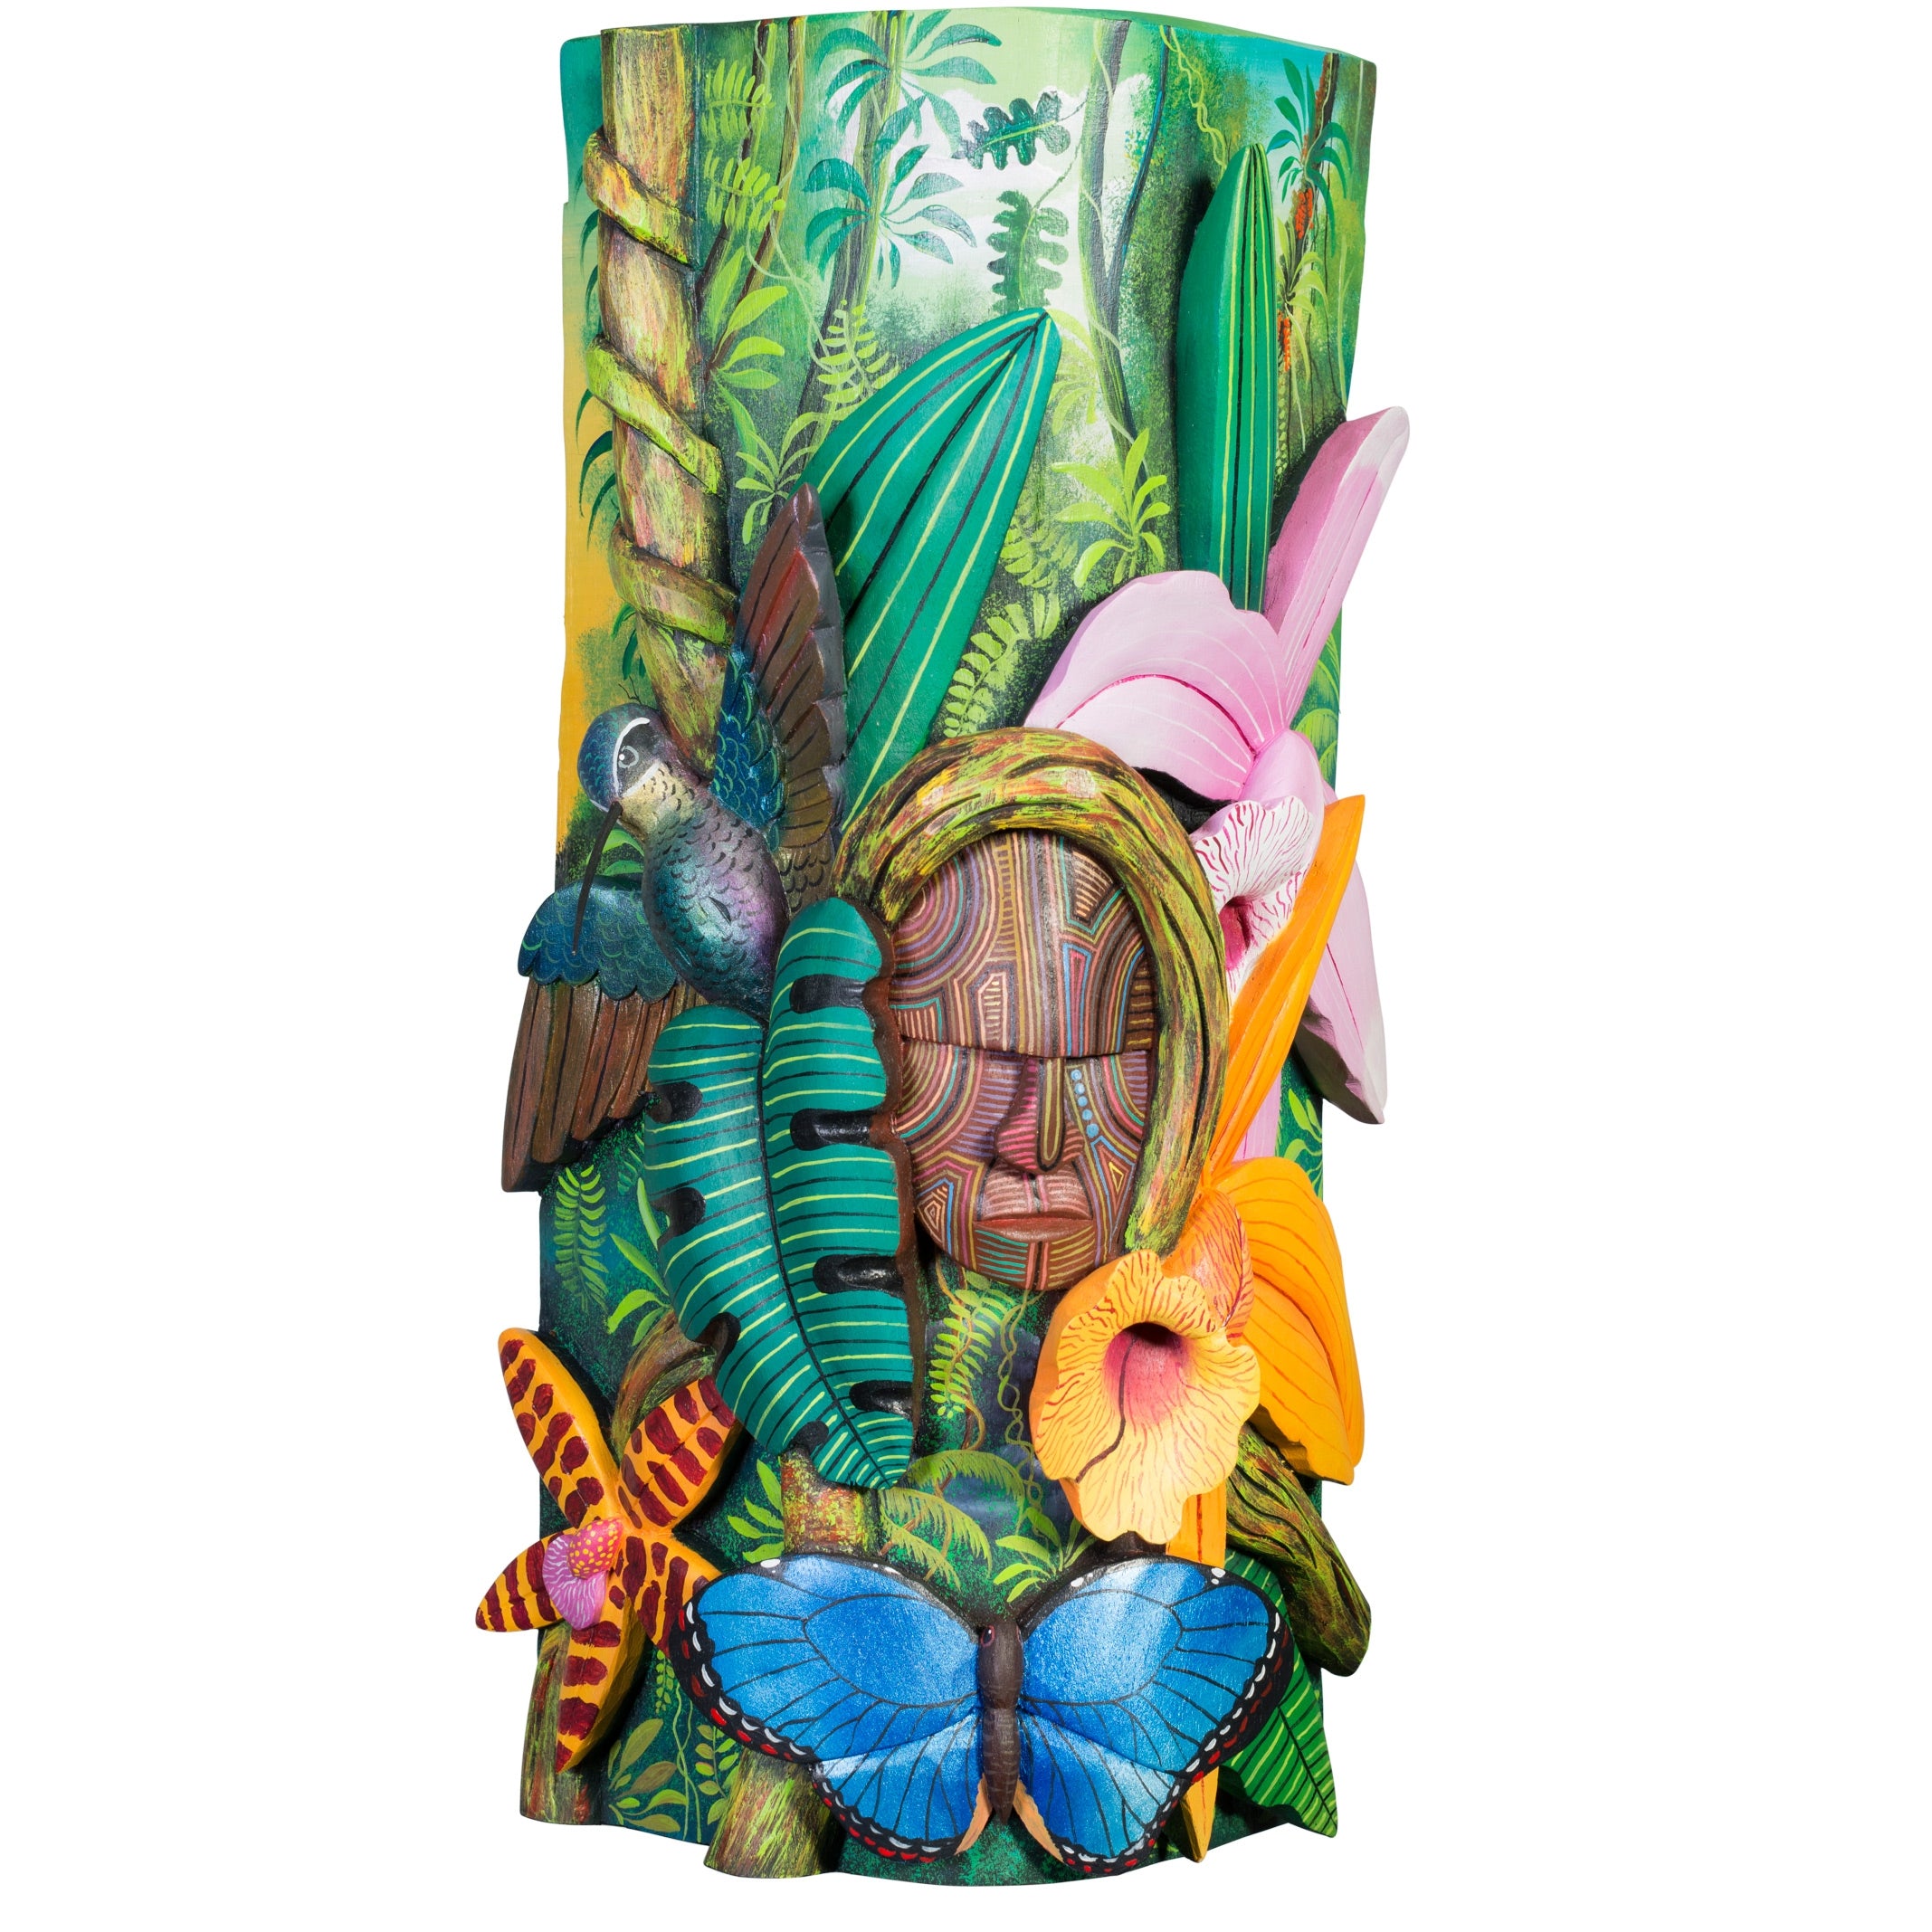 G084 Guided by Hope by Francisco Rojas Morales Balsa Wood Mask or Totem from Boruca, CR with size 18" x 9"